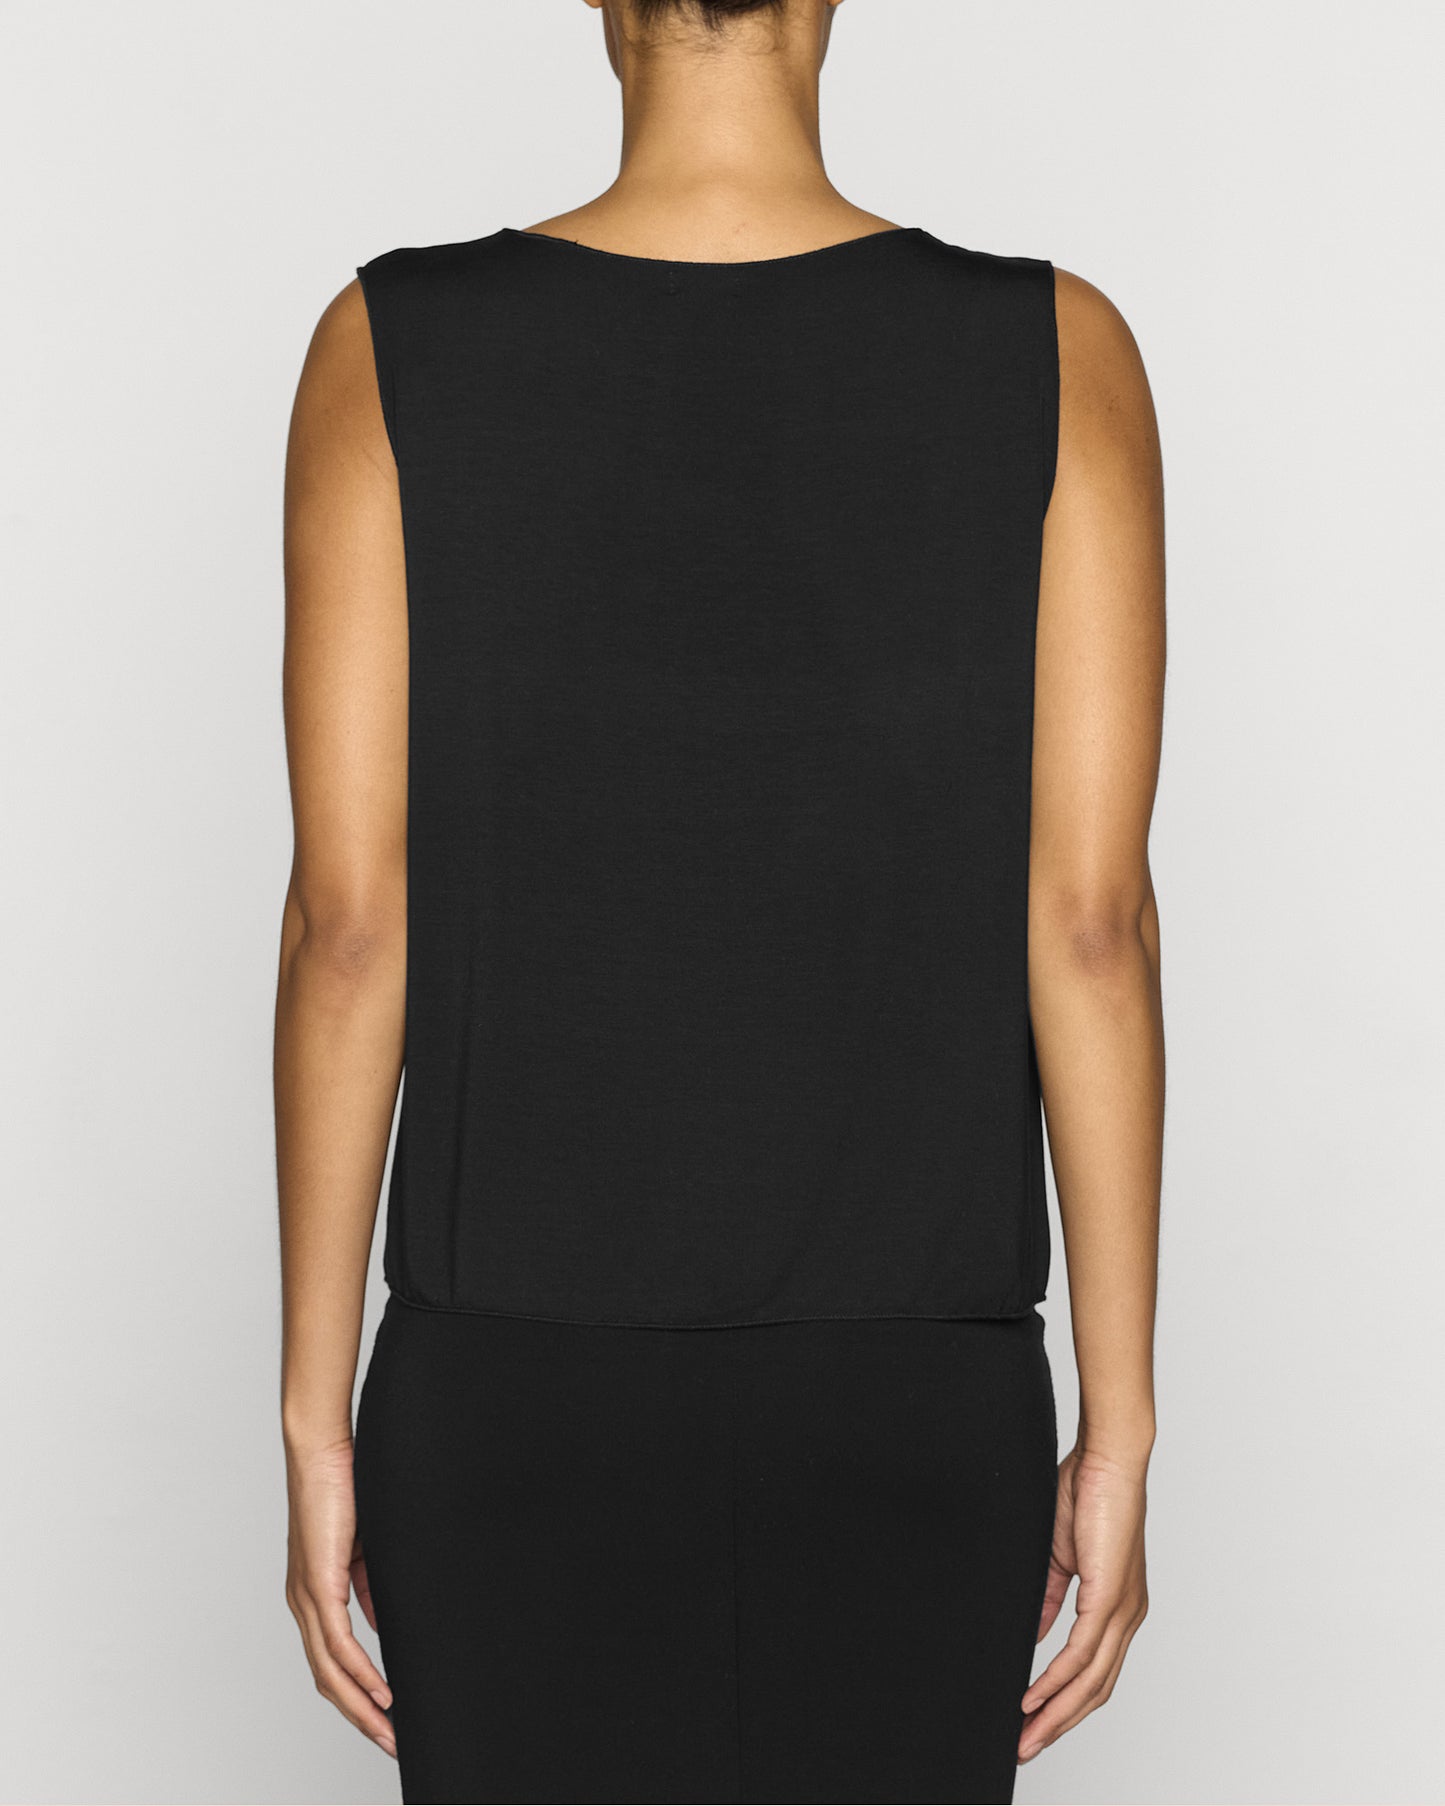 Black | The Swing Top Back